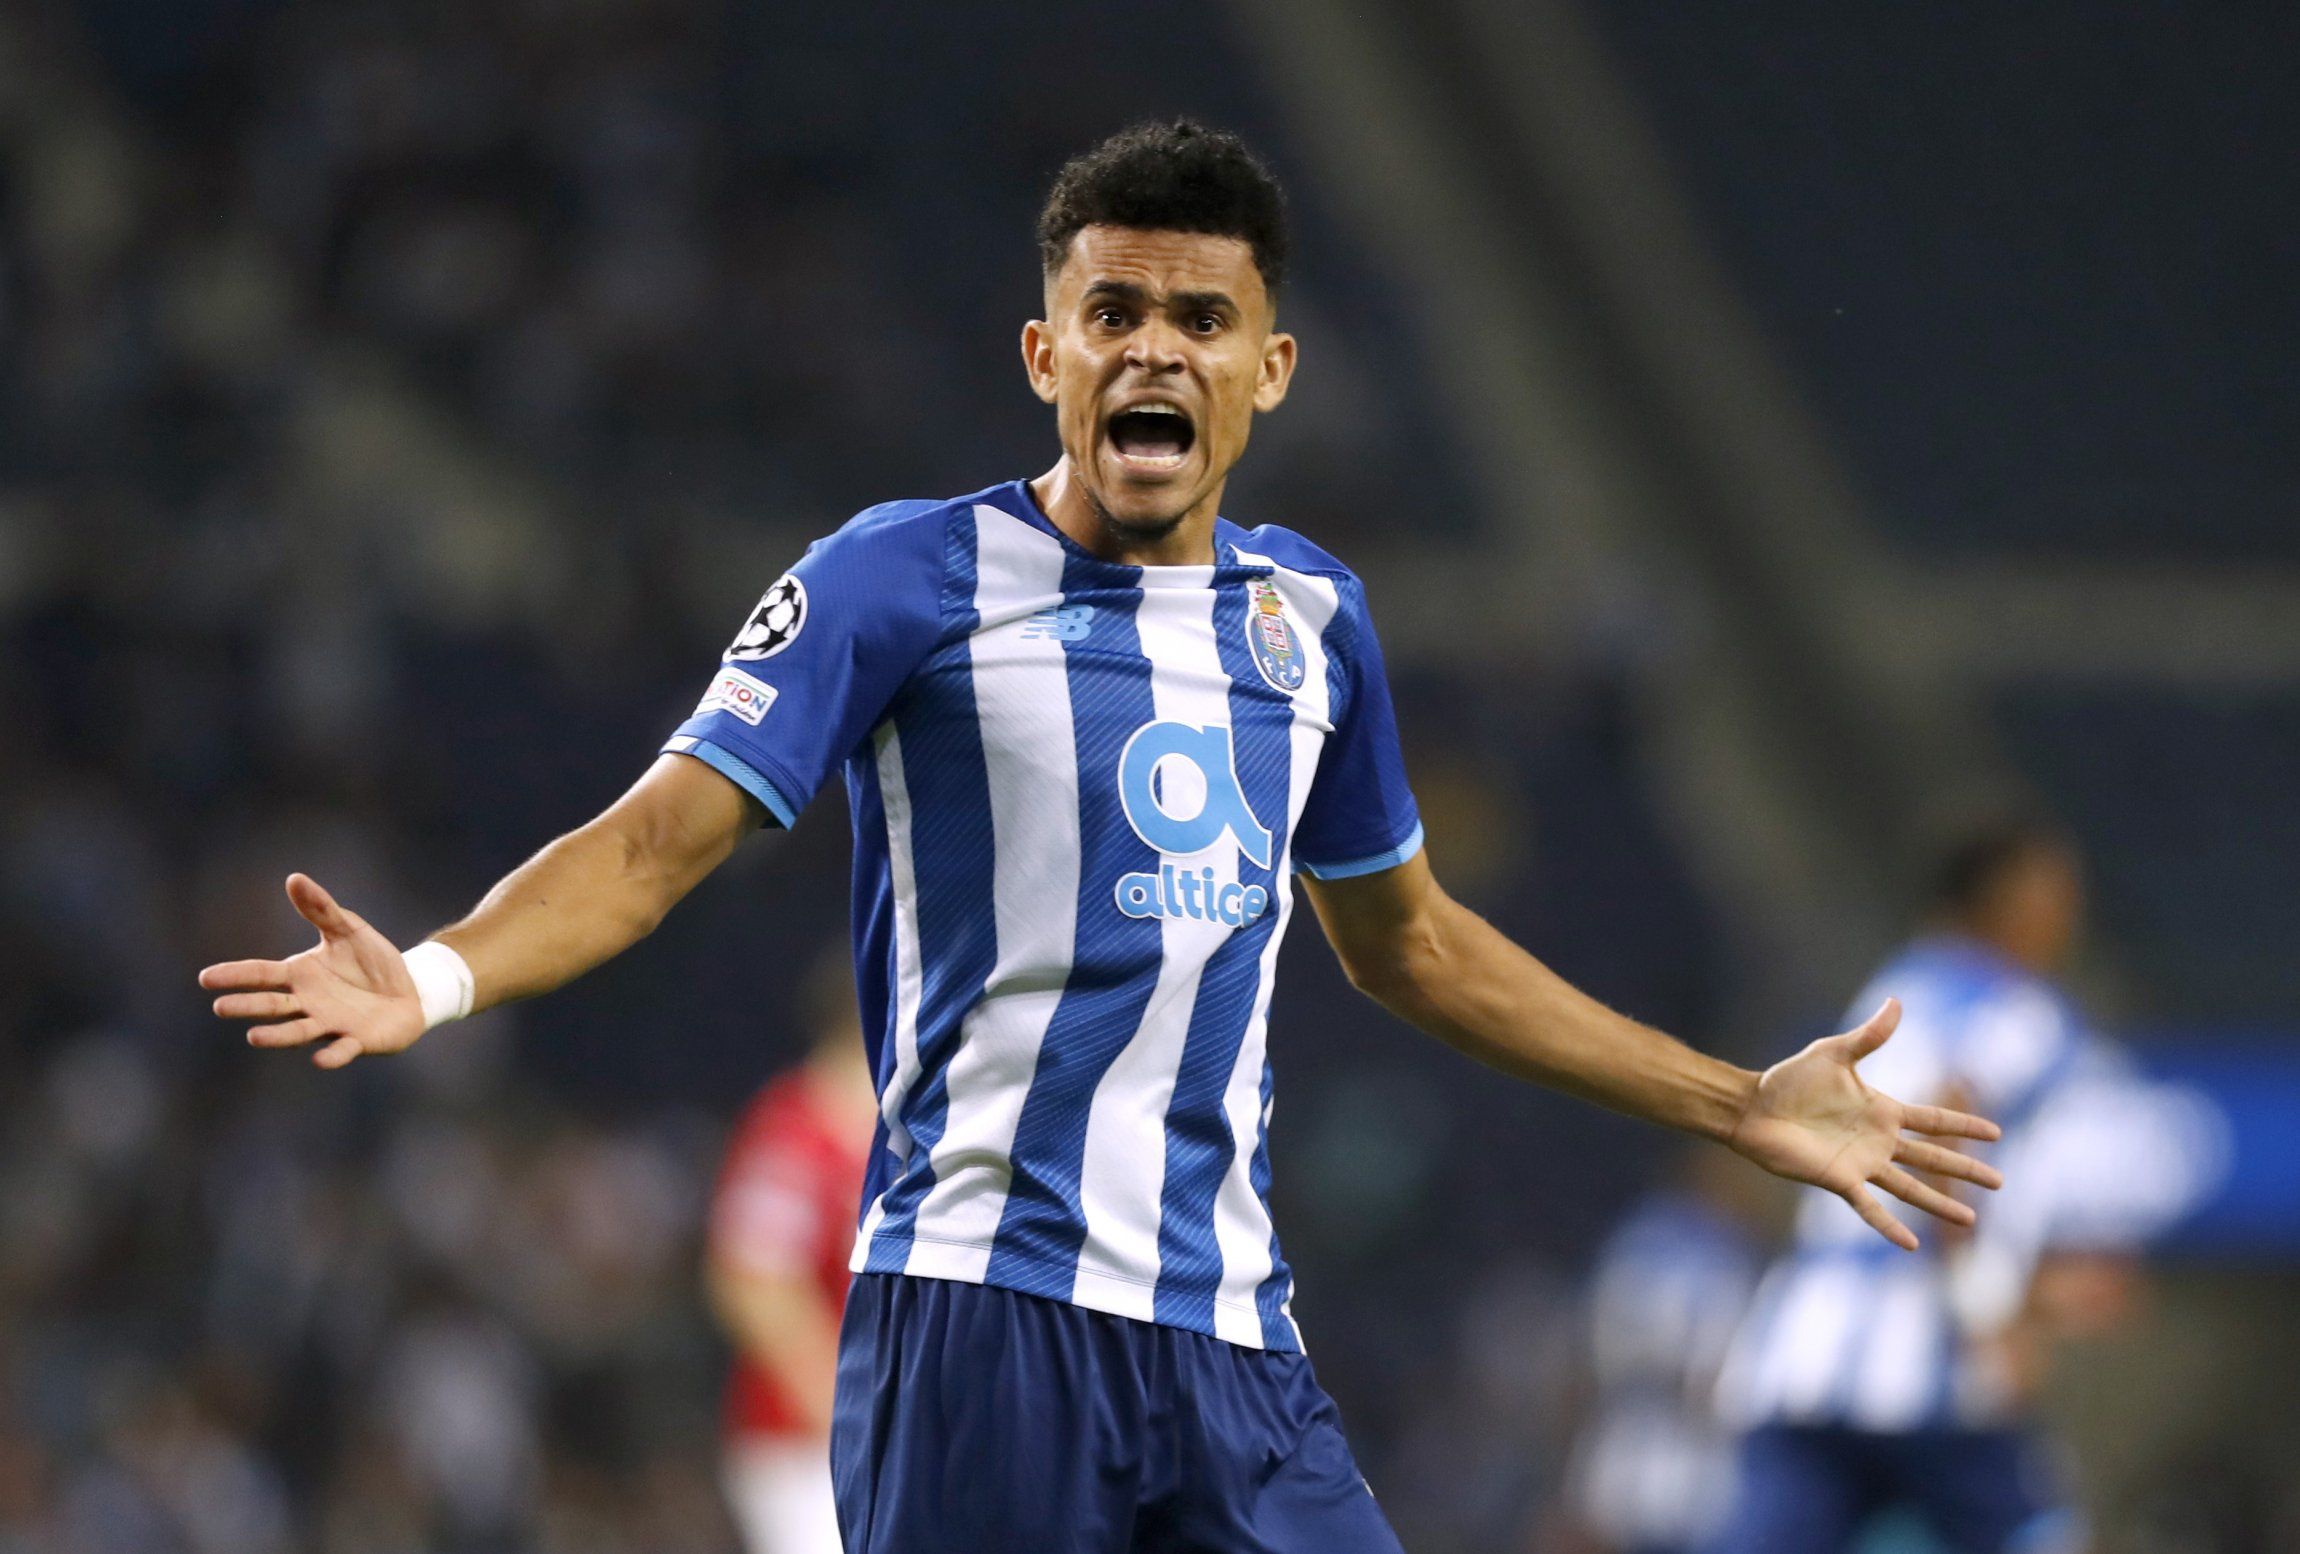 Porto winger Luis Diaz has been linked to Manchester United